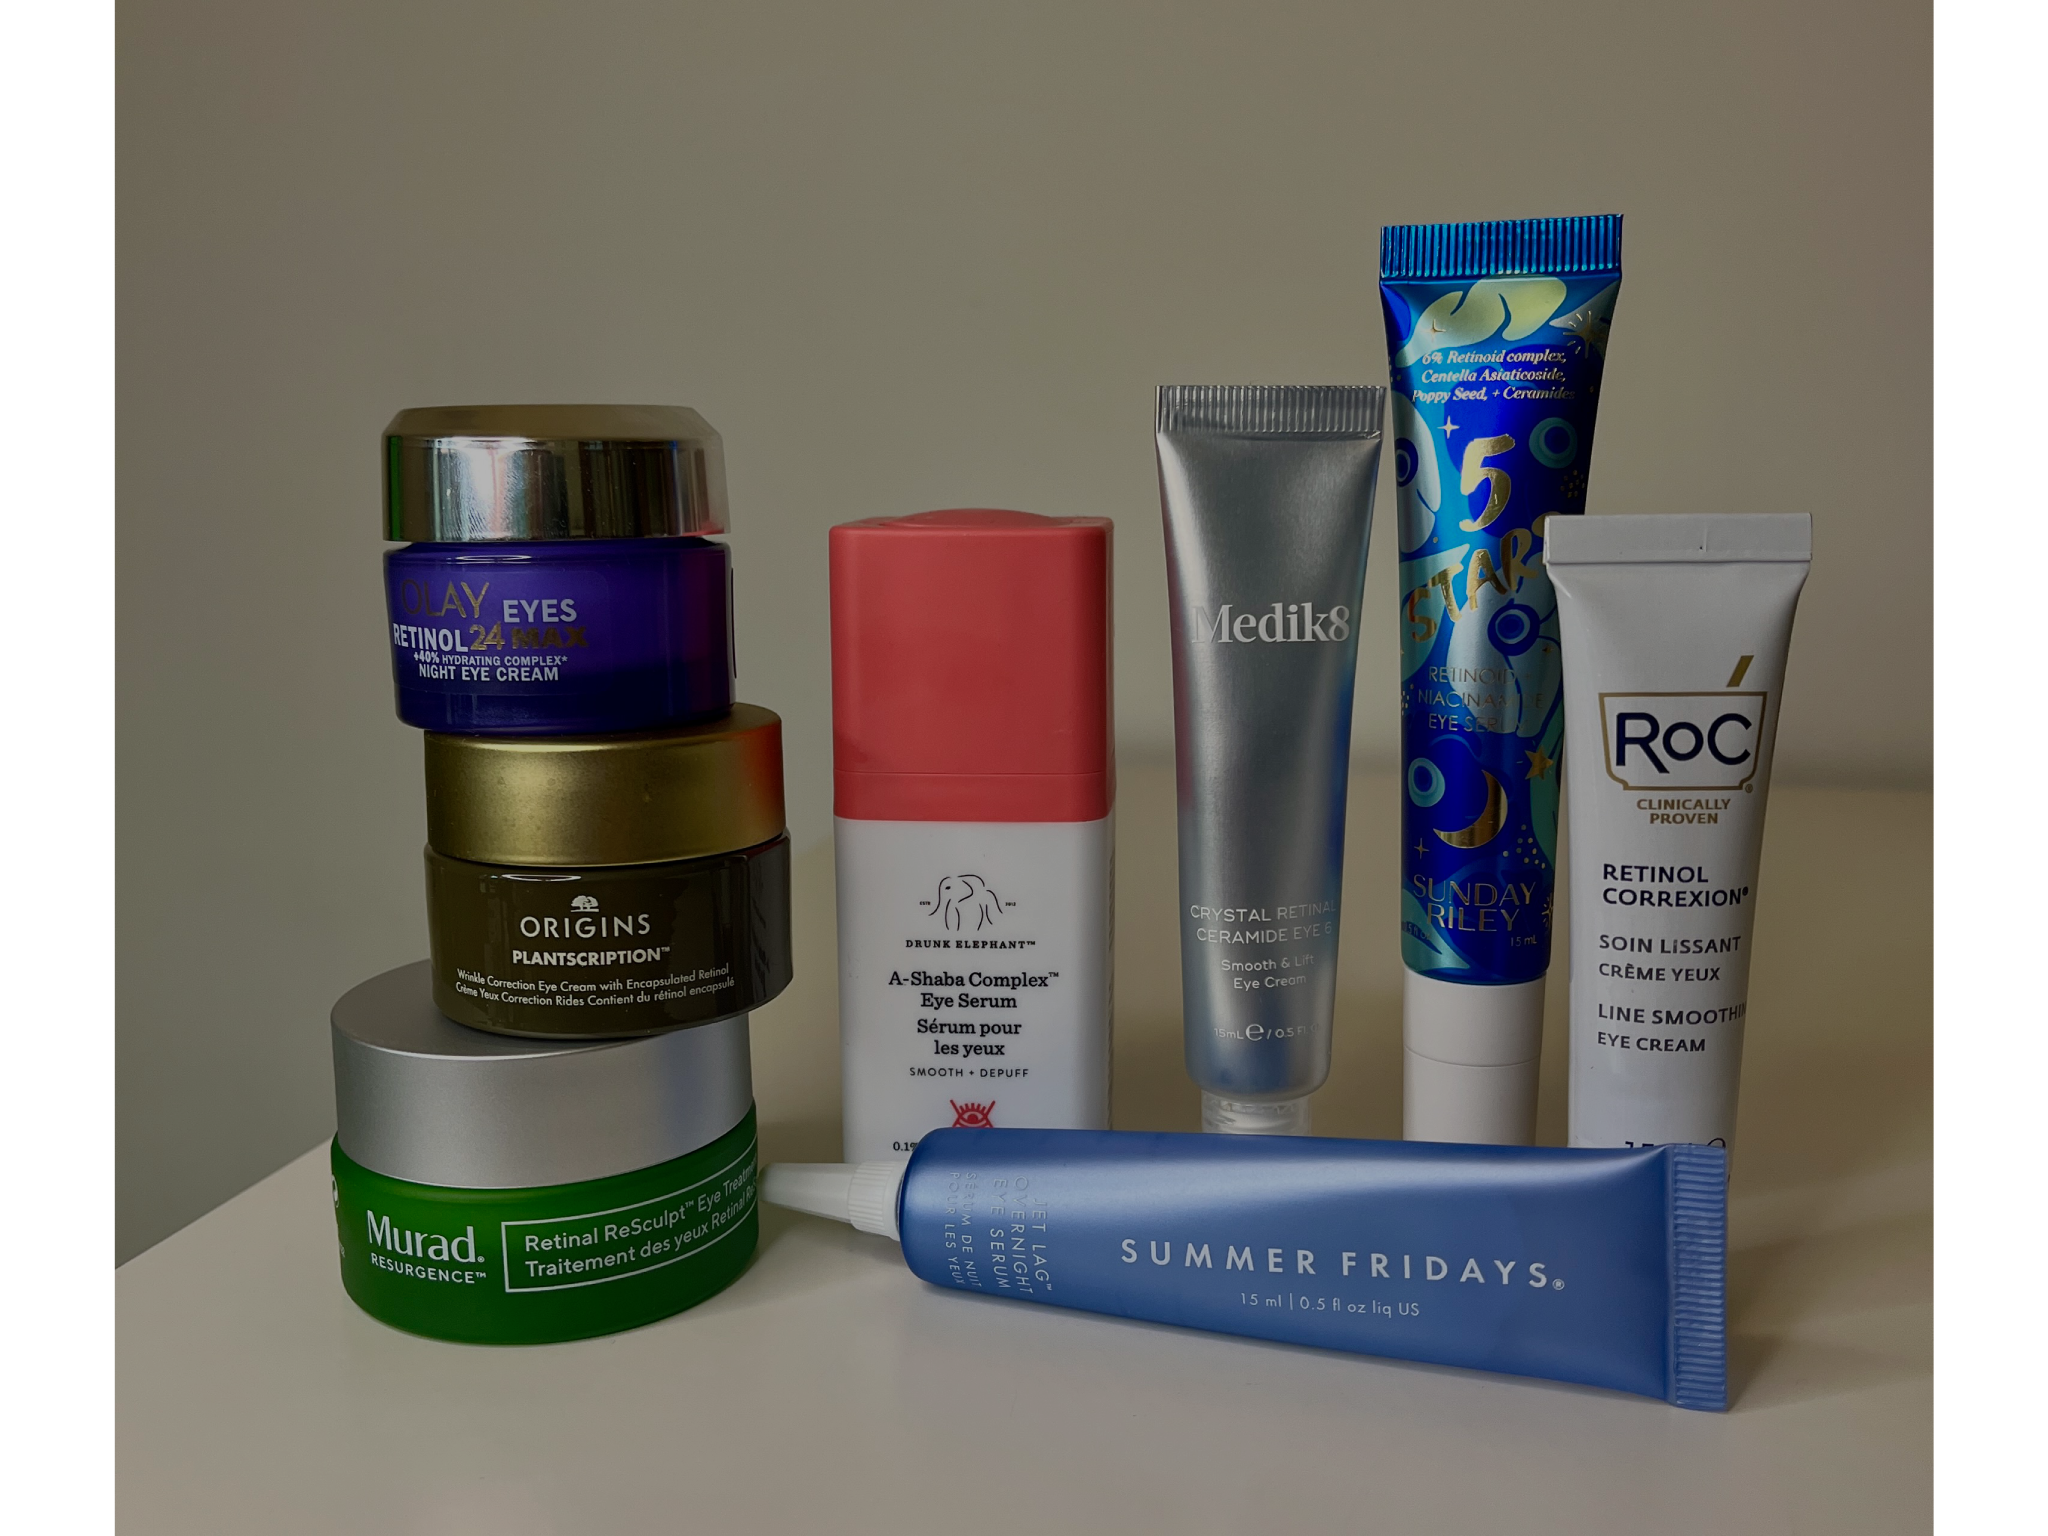 A selection of the retinol eye creams and serums we tested